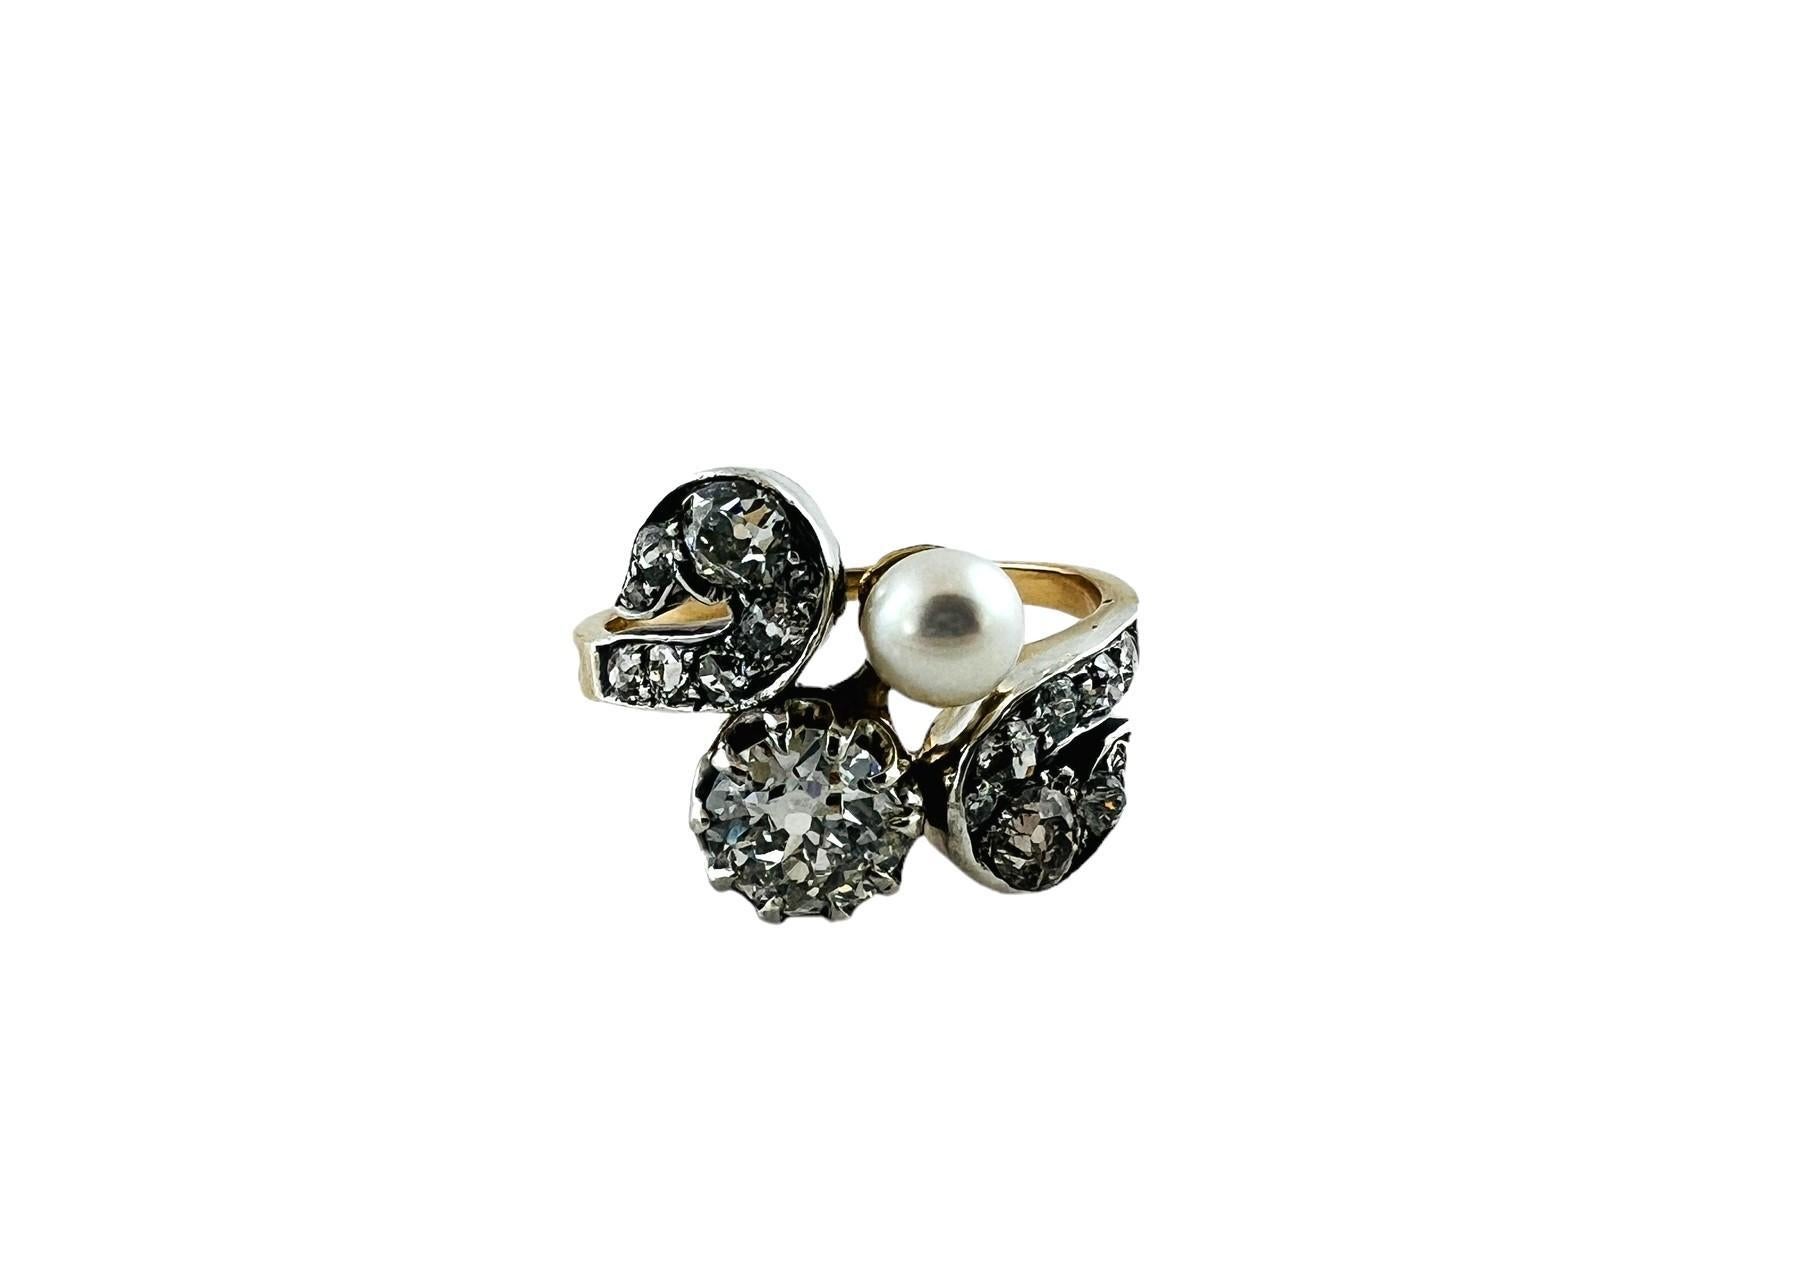 Vintage 14K Yellow and White Gold Diamond and Pearl Ring 1.80cttw #16585 For Sale 2